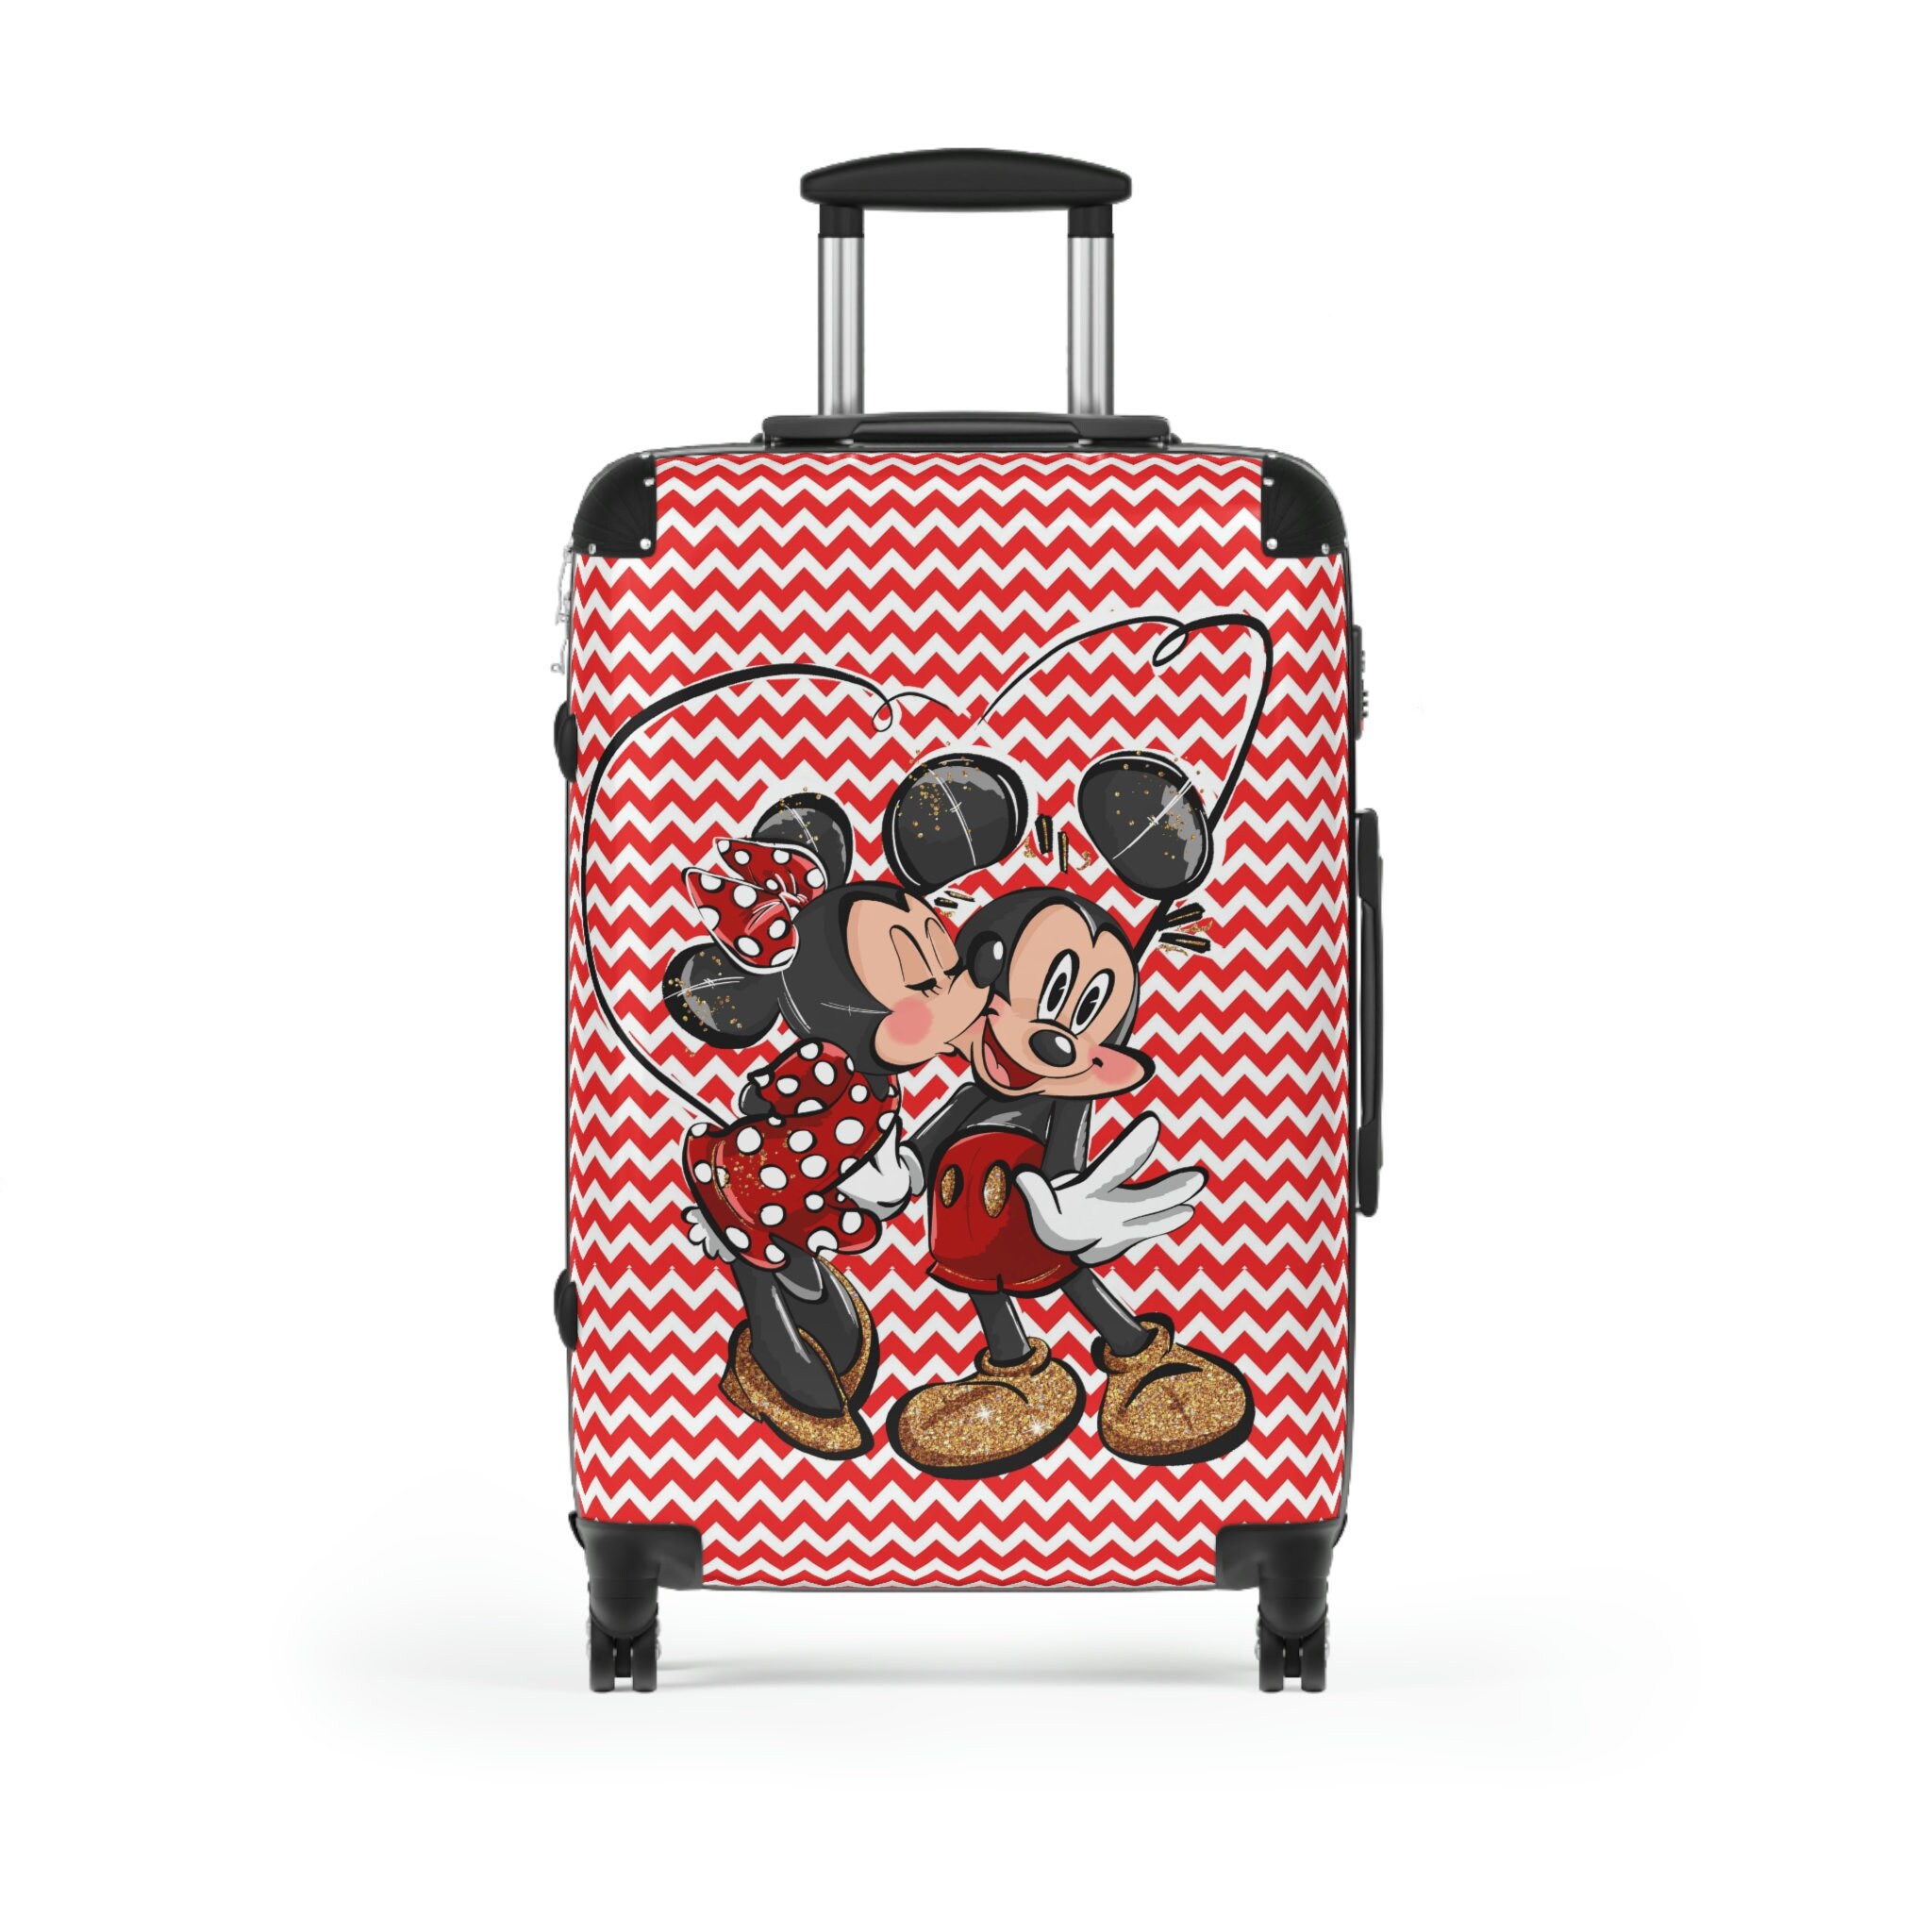 Mickey Mouse Luggage Cover, Mickey and Minnie Mouse Luggage Cover